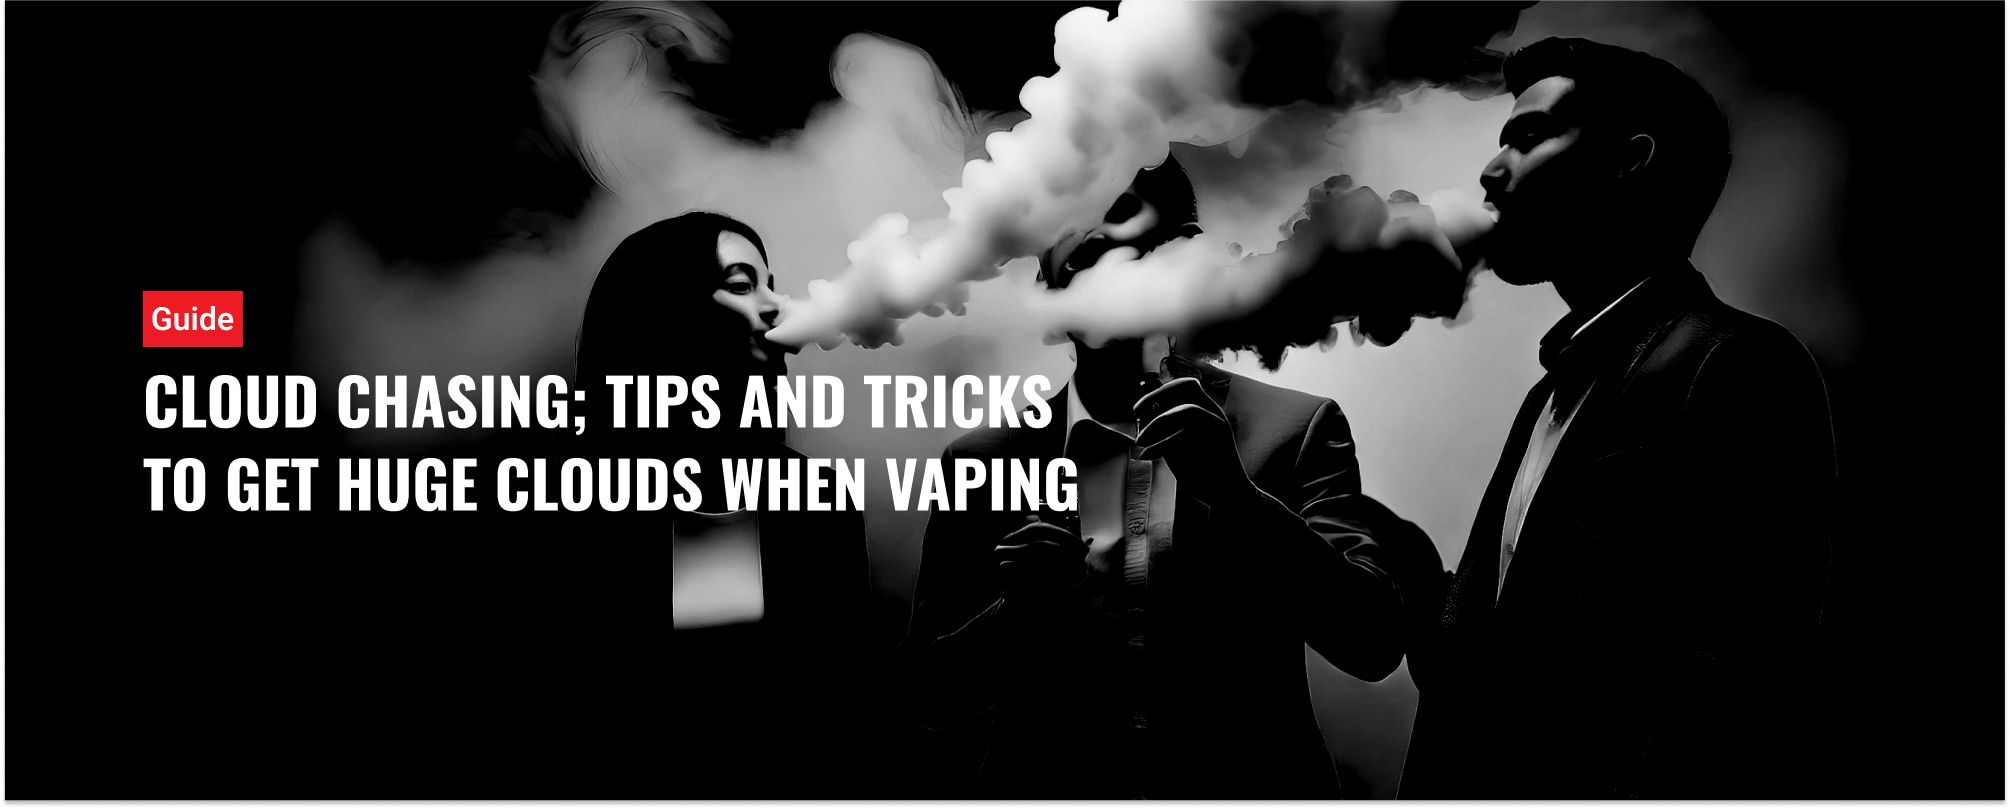 Cloud Chasing; Tips And Tricks To Get Huge Clouds When Vaping